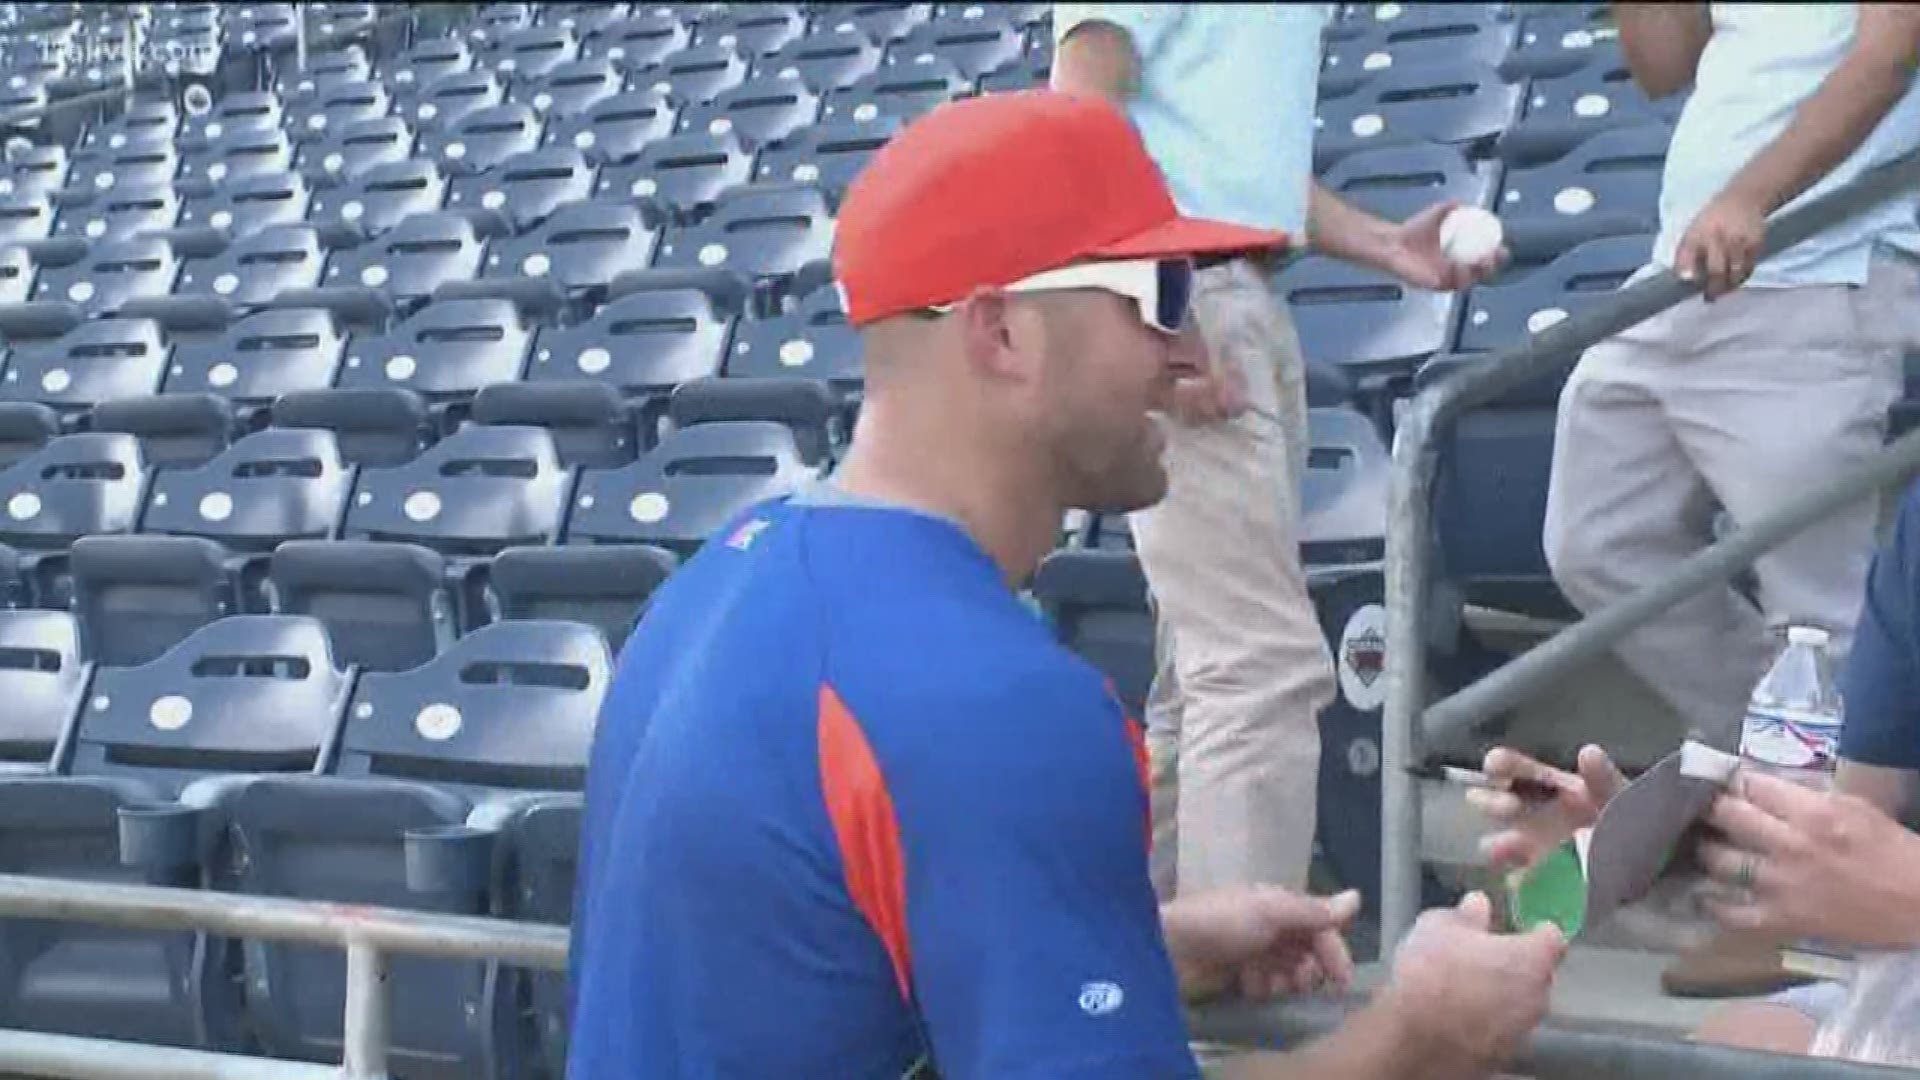 Tebow was in town Saturday playing minor league baseball with Syracuse against the Gwinnett Stripers and offered his opinion of Georgia's chances this season.